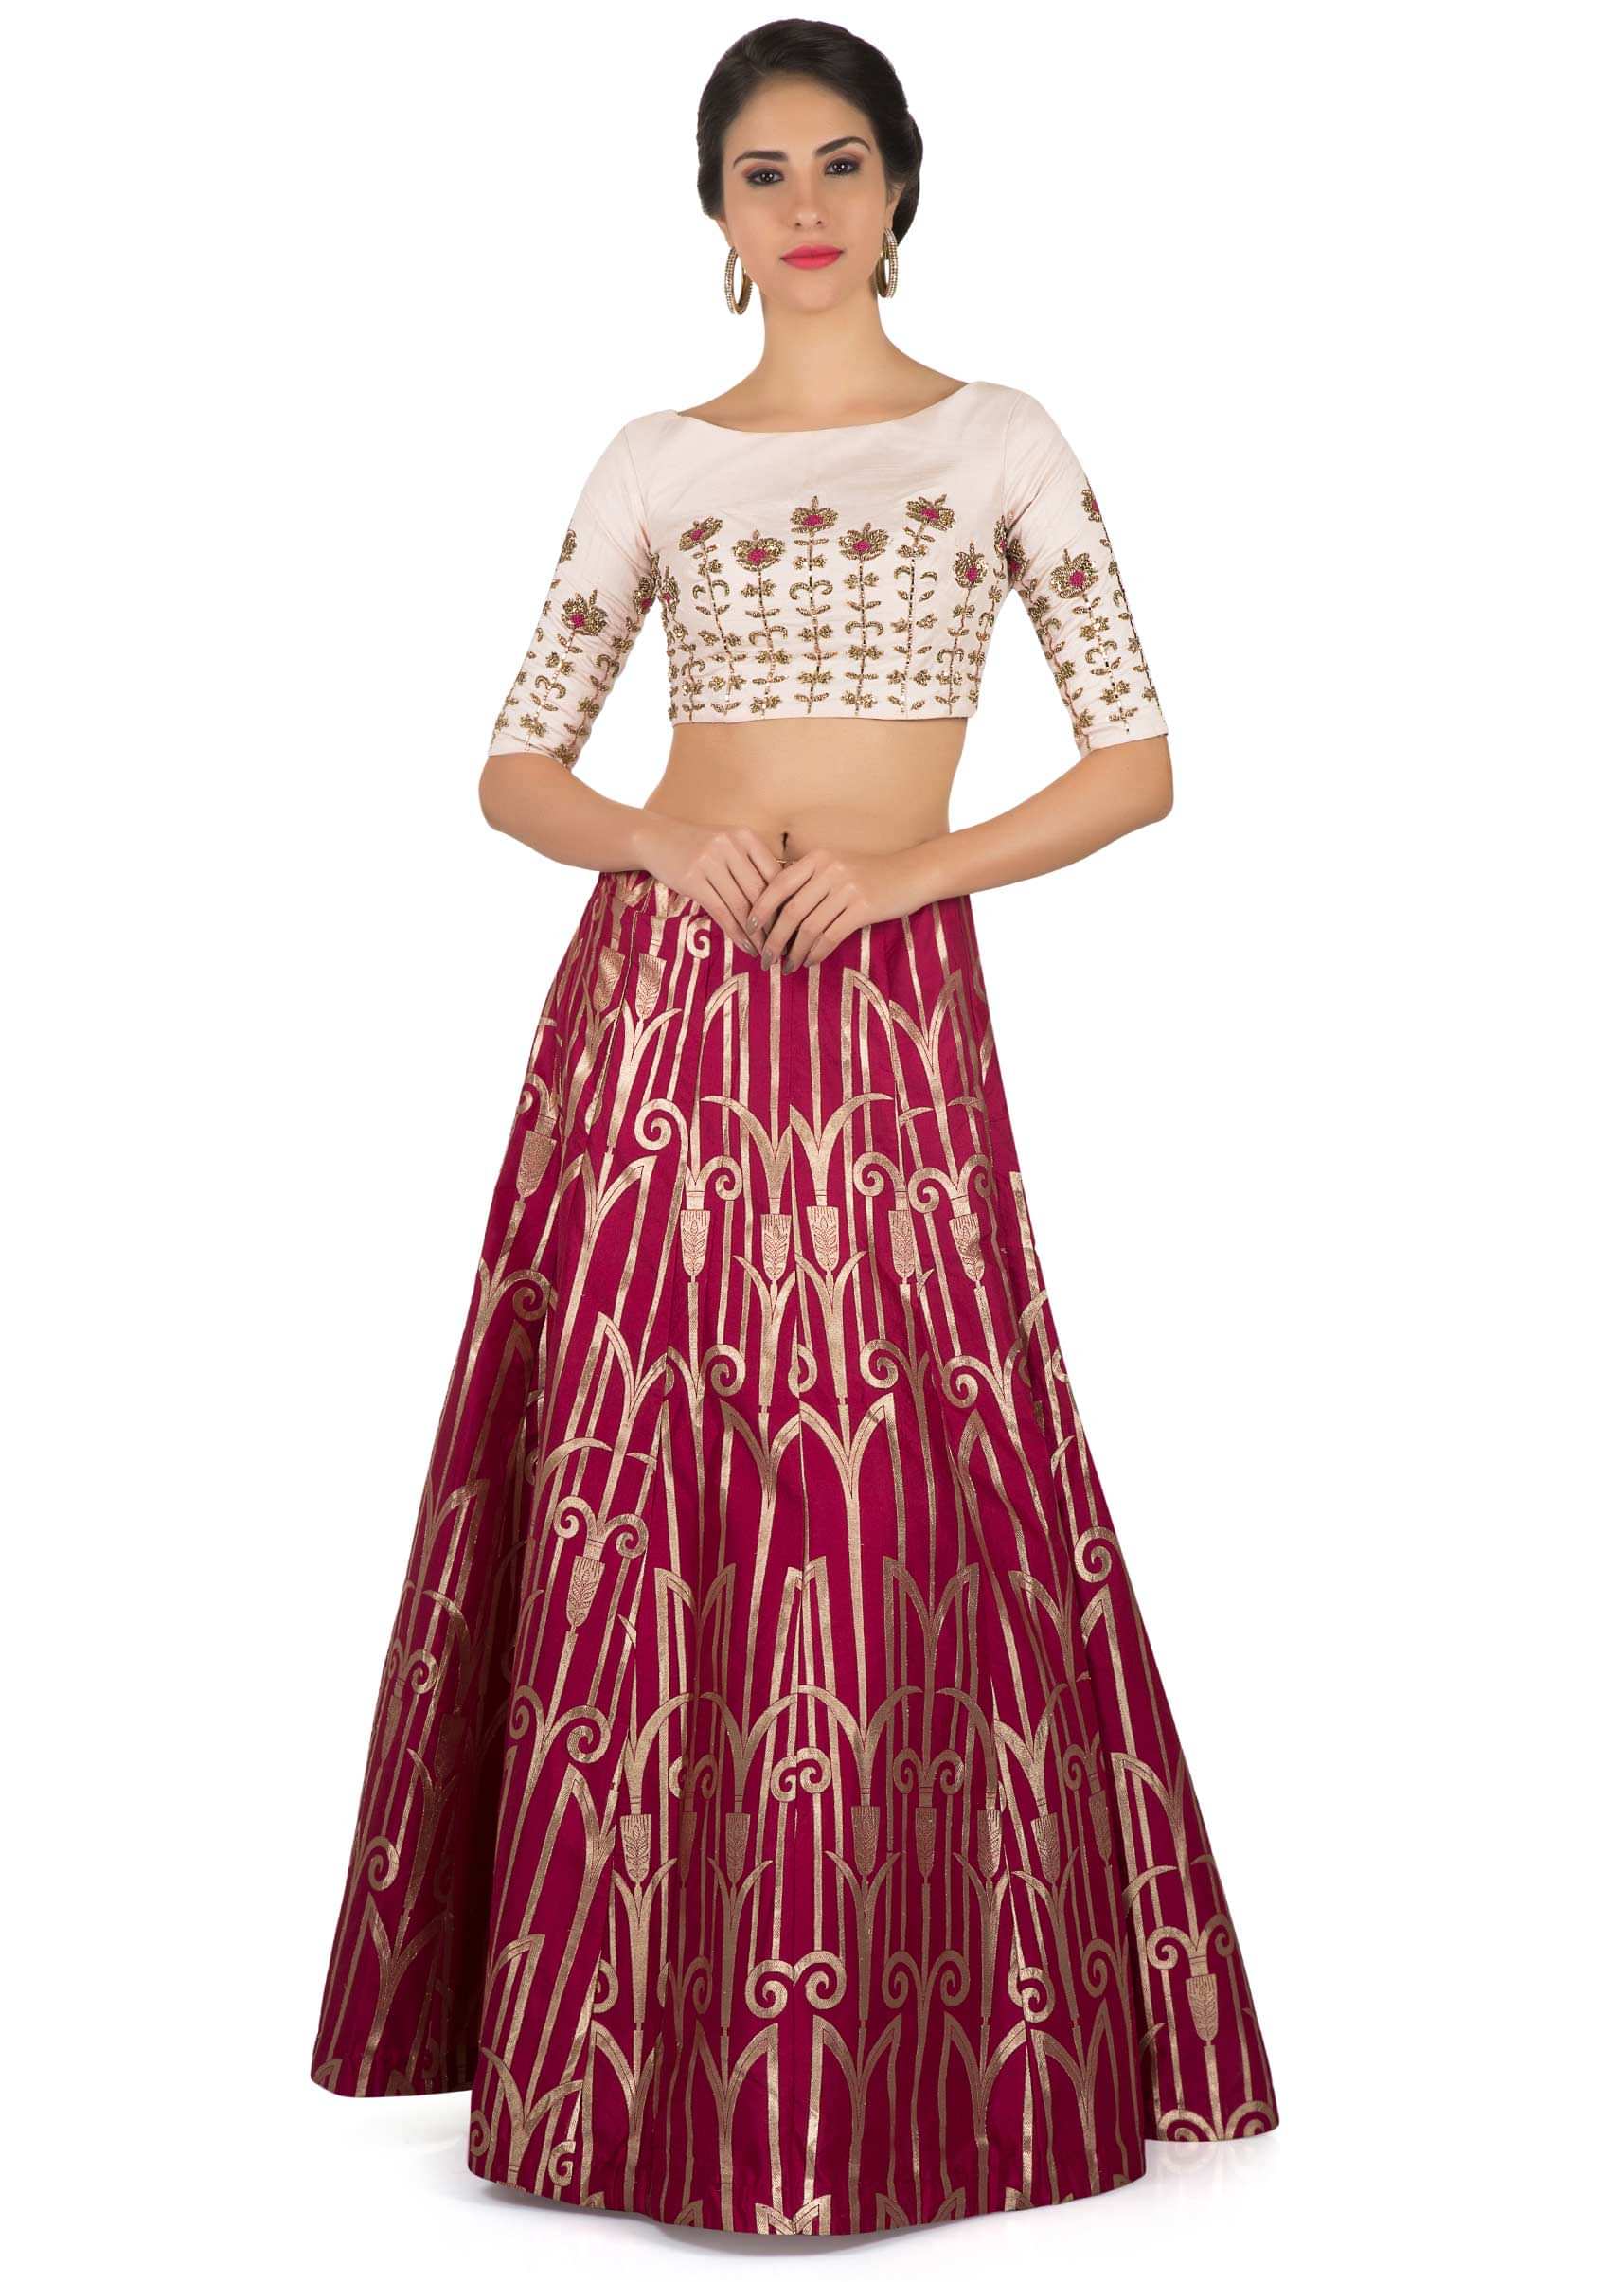 Magenta Lehenga In Brocade Silk Matched With Baby Pink Embroidered Crop Top Online - Kalki Fashion